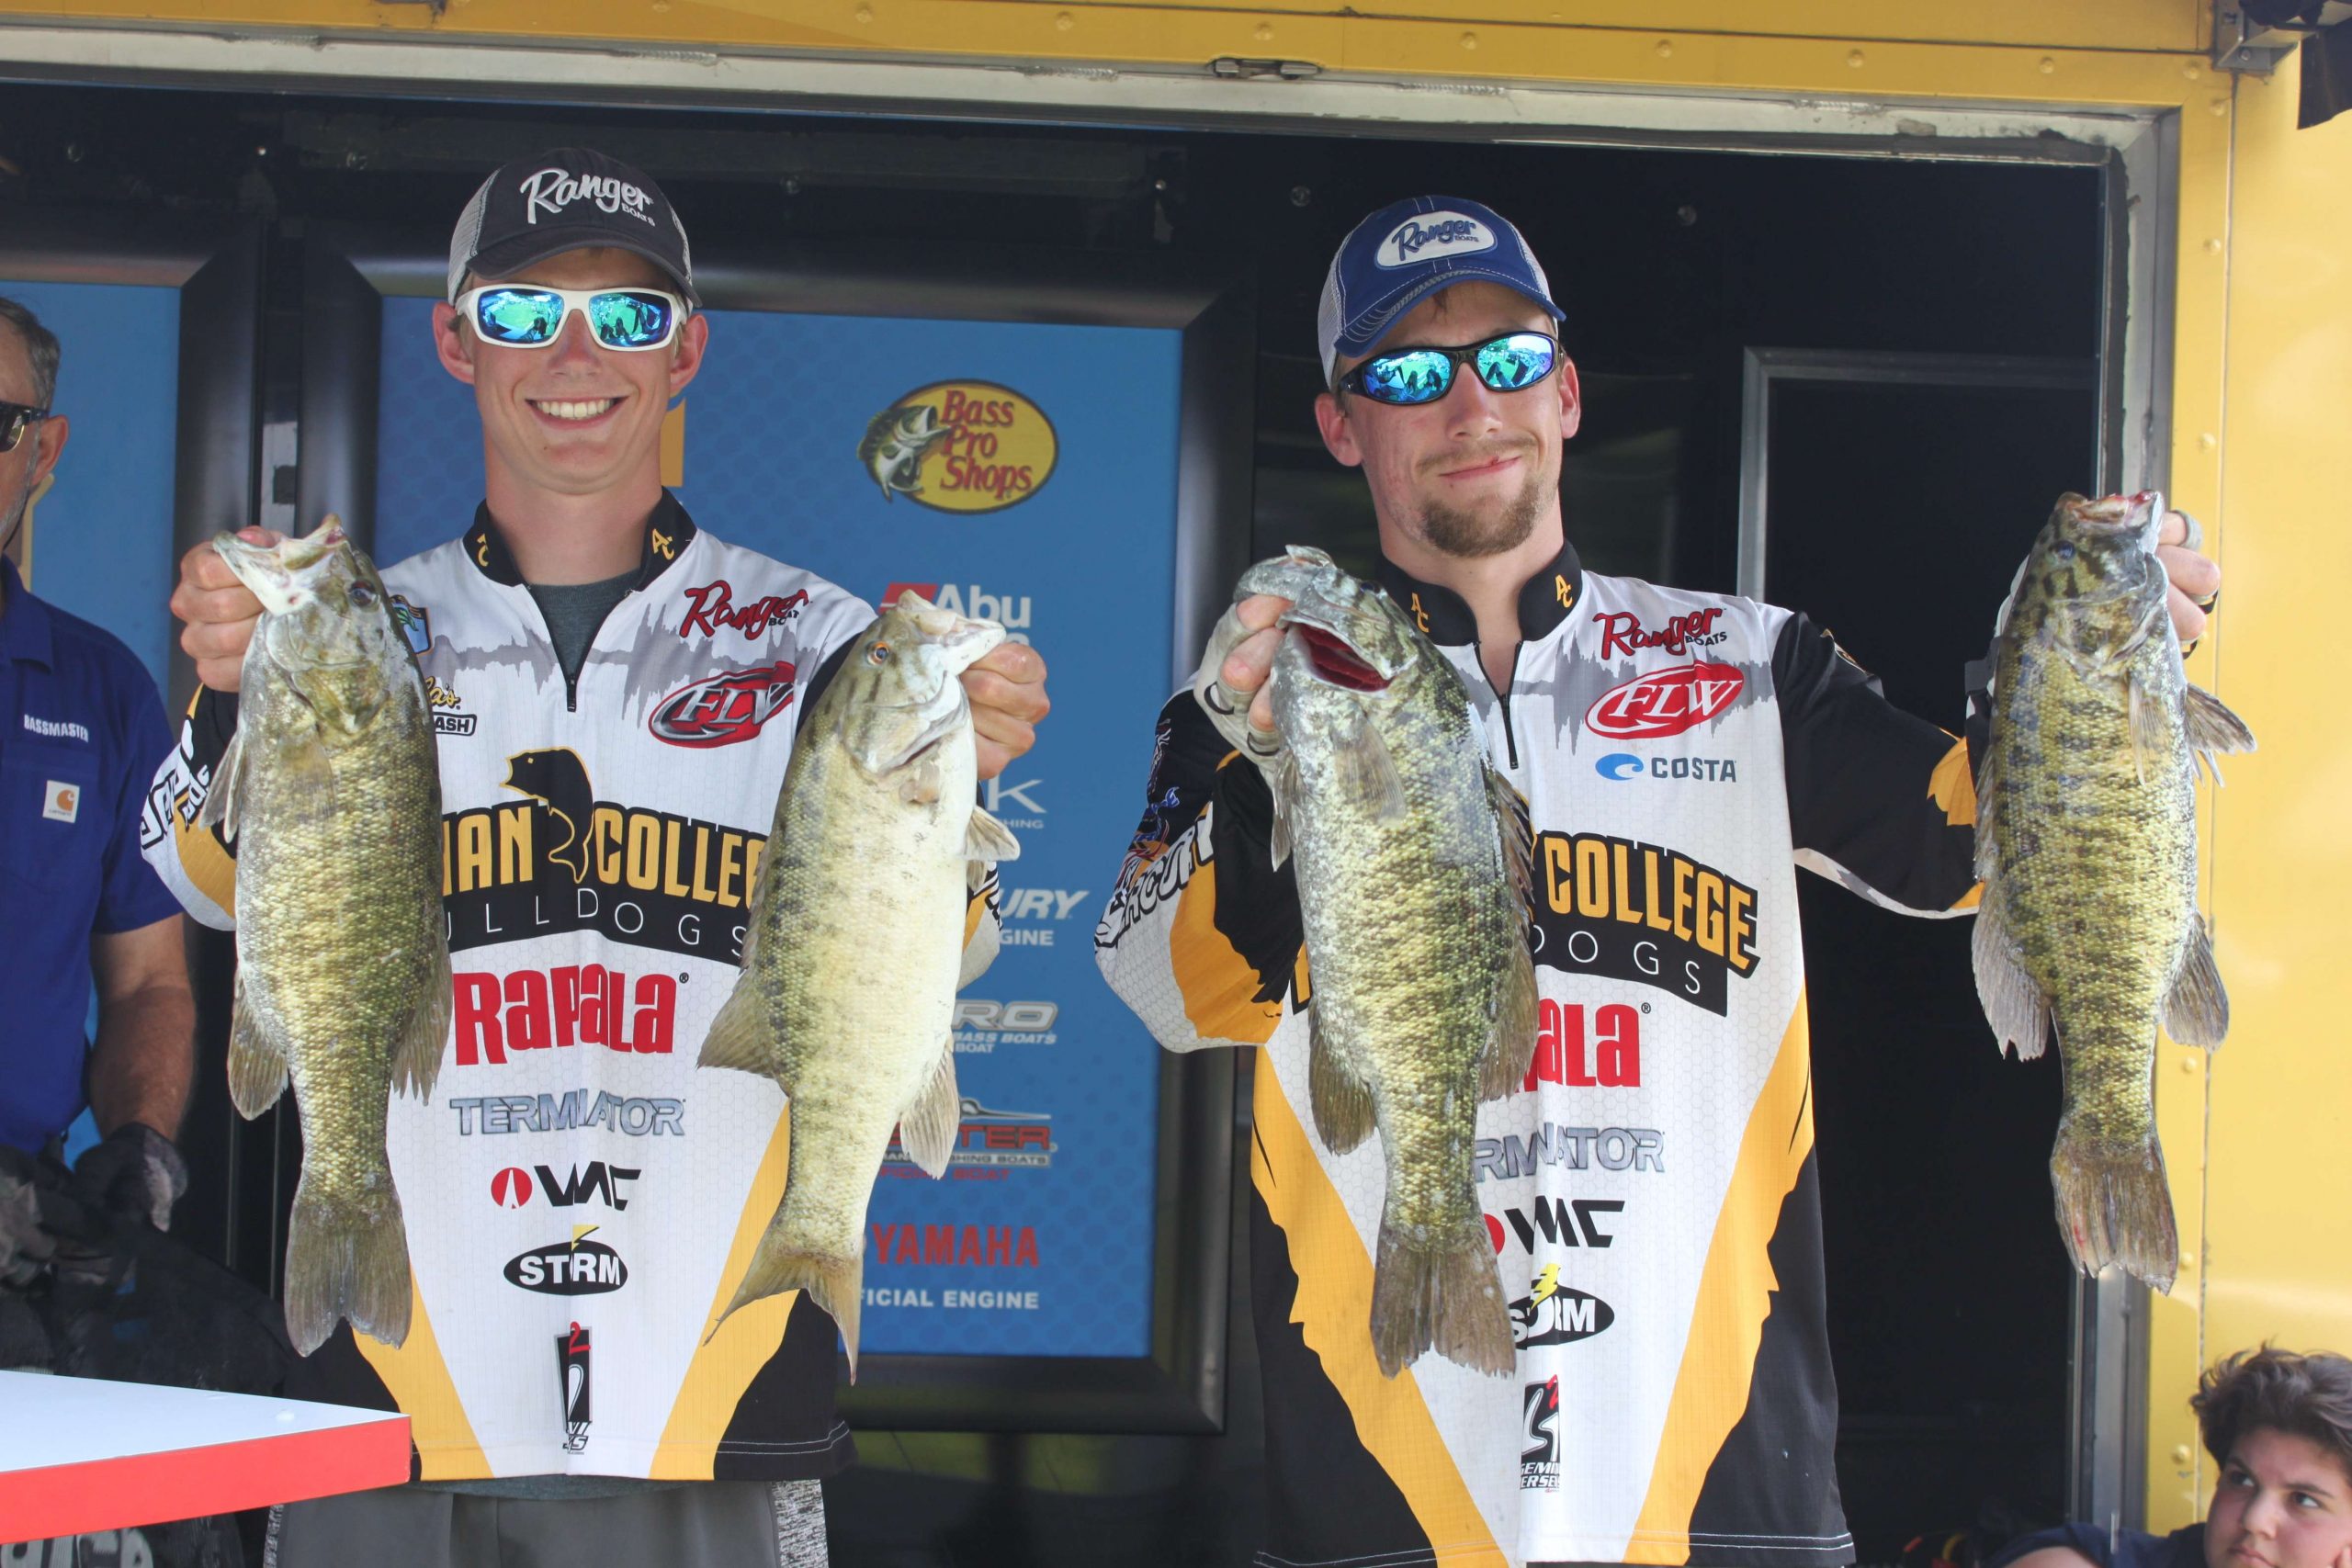 And now to the stage! Thereâs Ben Barrus and Tyler VanBrandt of Adrian College who are in 17th place after two days with a 25 pound, 2 ounce total.